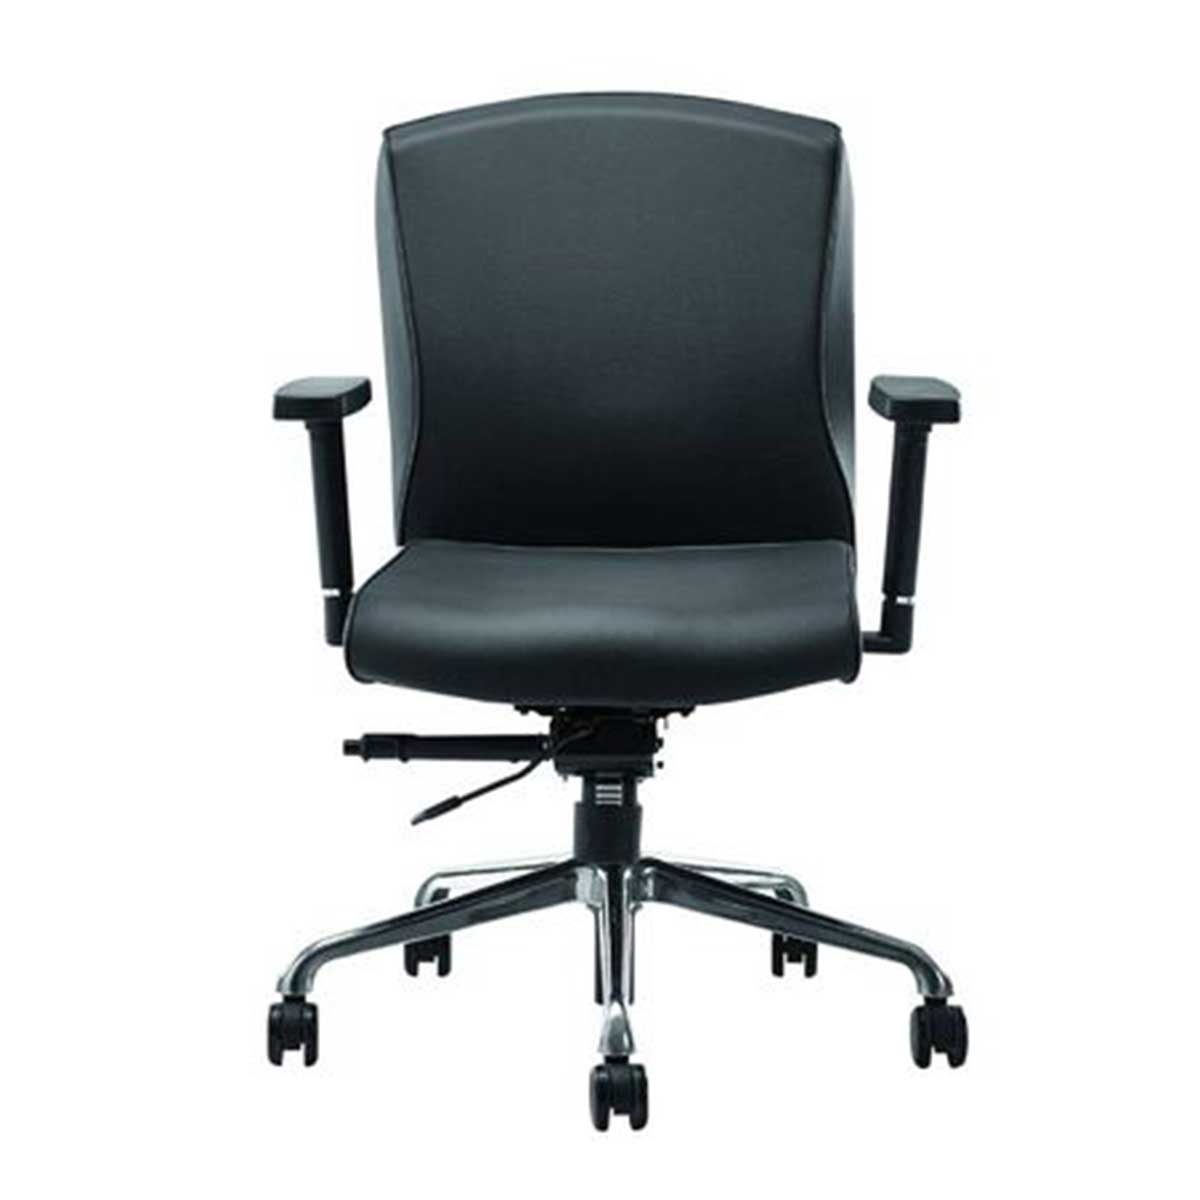 Low Back Office Chair Manufacturers, Suppliers in Vaishali